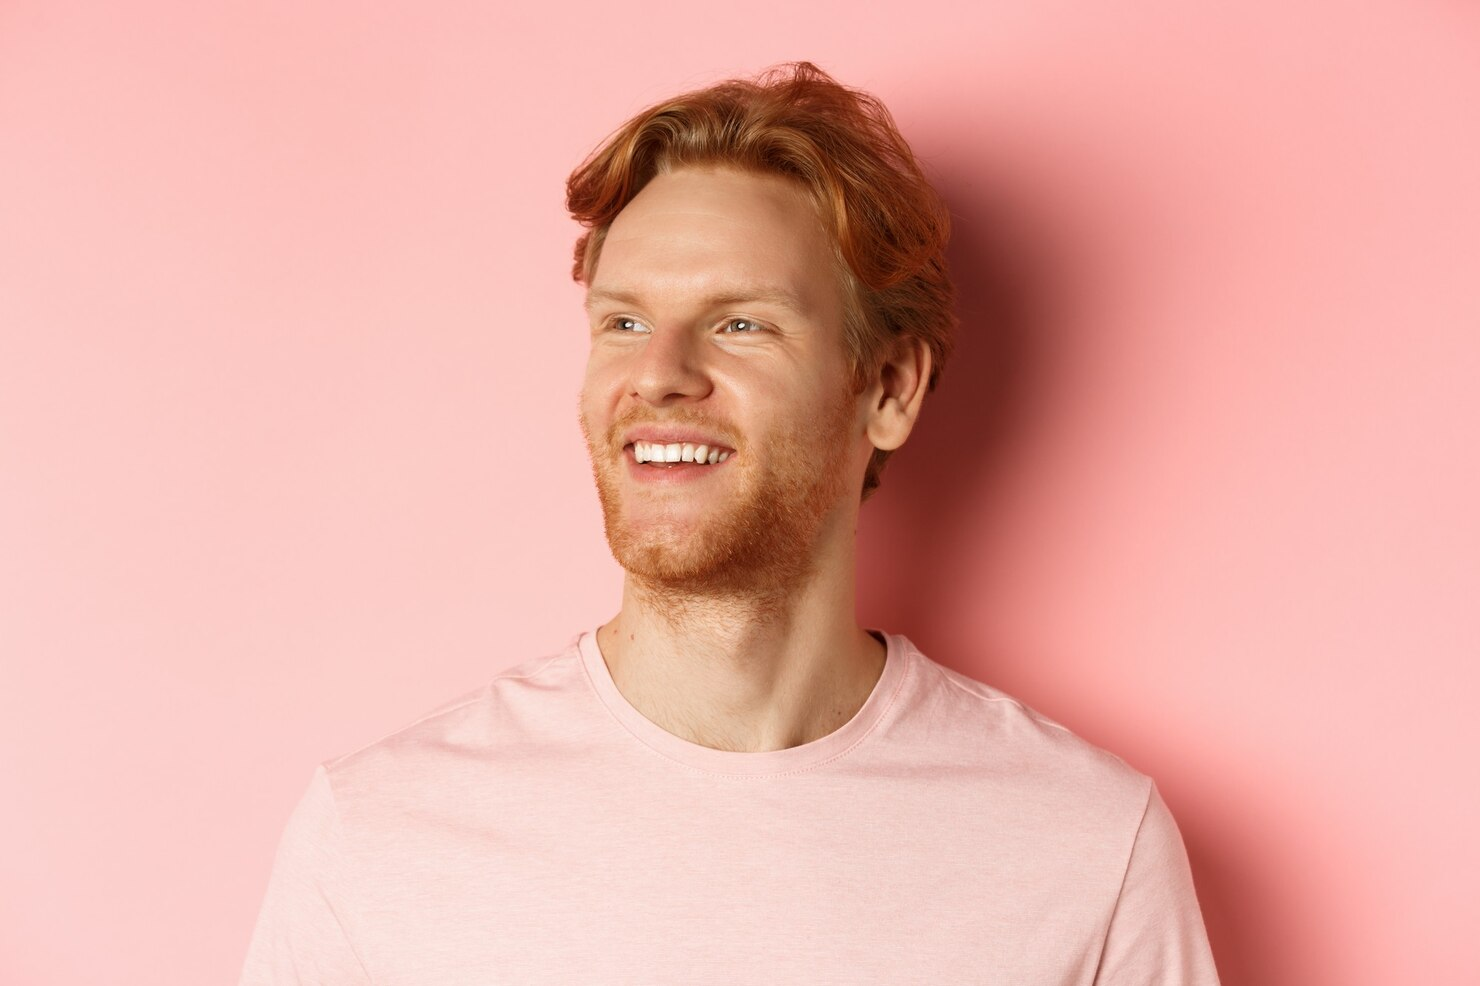 A man looks away and laughs in a pink shirt.